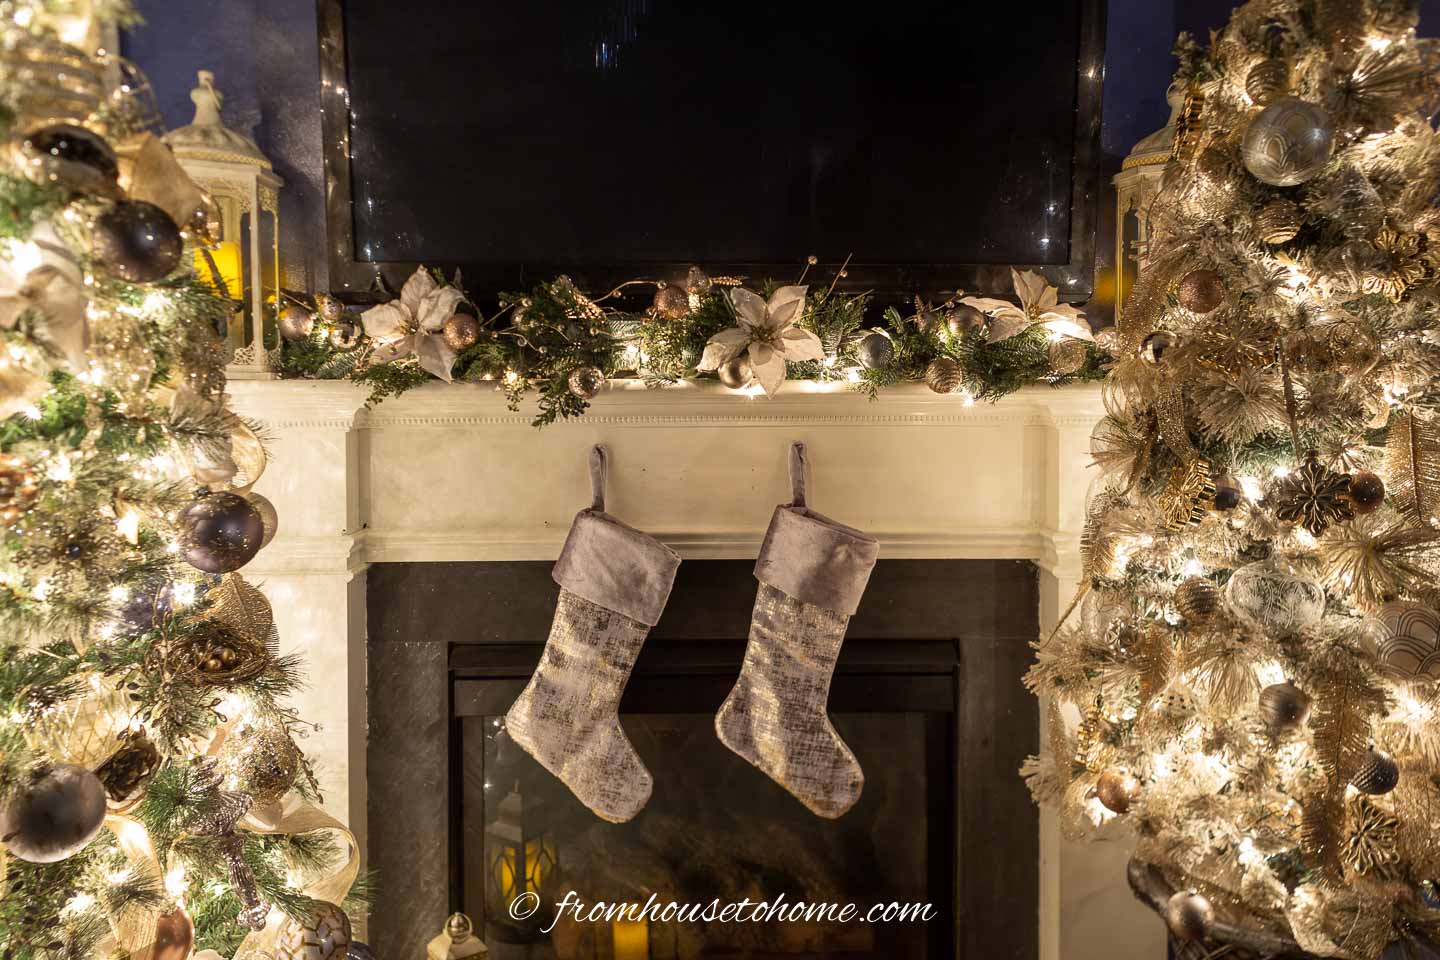 Fireplace mantel decorated for Christmas with stockings, a garland and 2 Christmas trees on either side